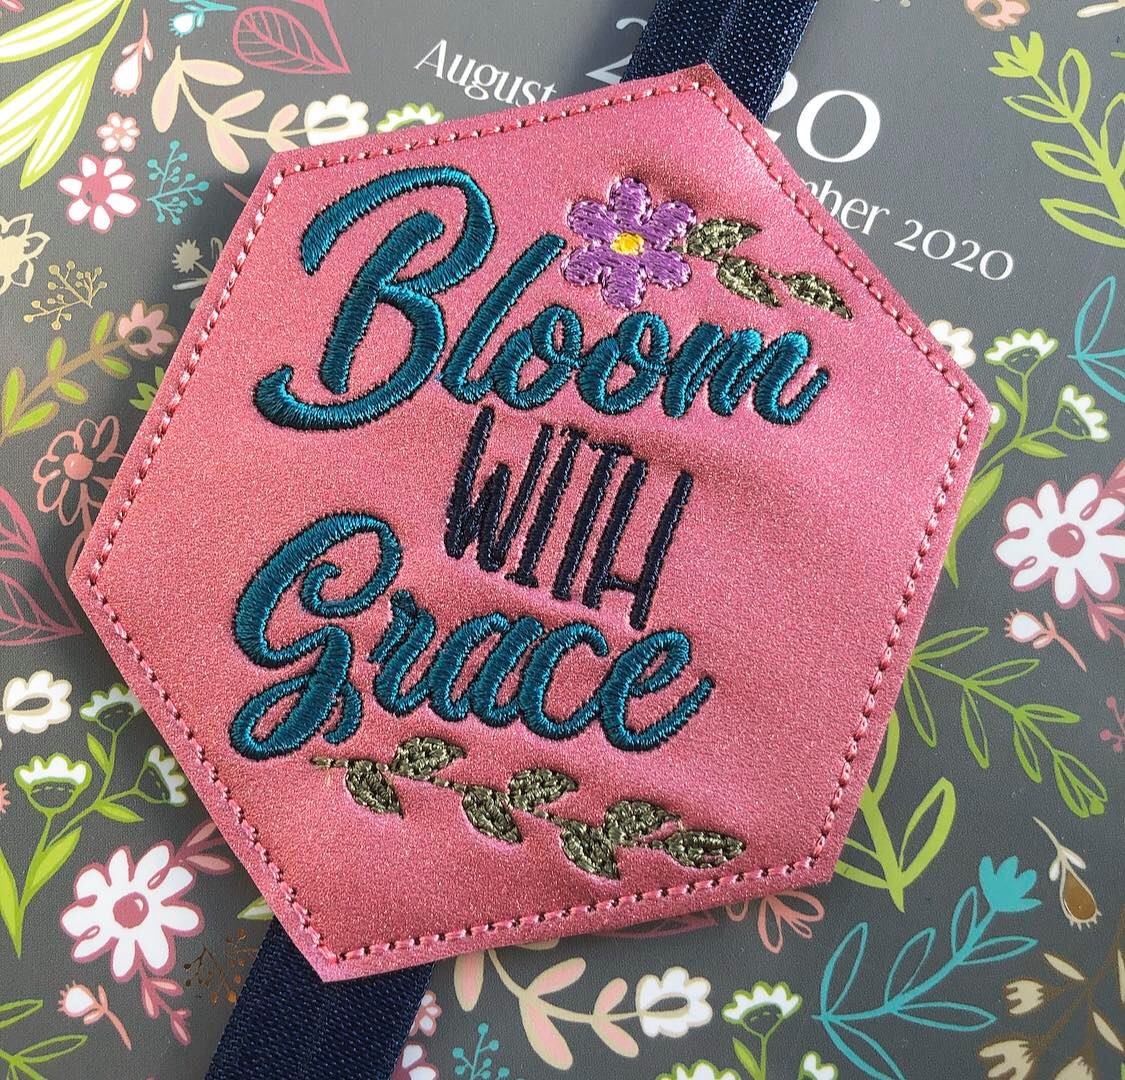 Bloom with Grace- Book Band - Digital Embroidery Design